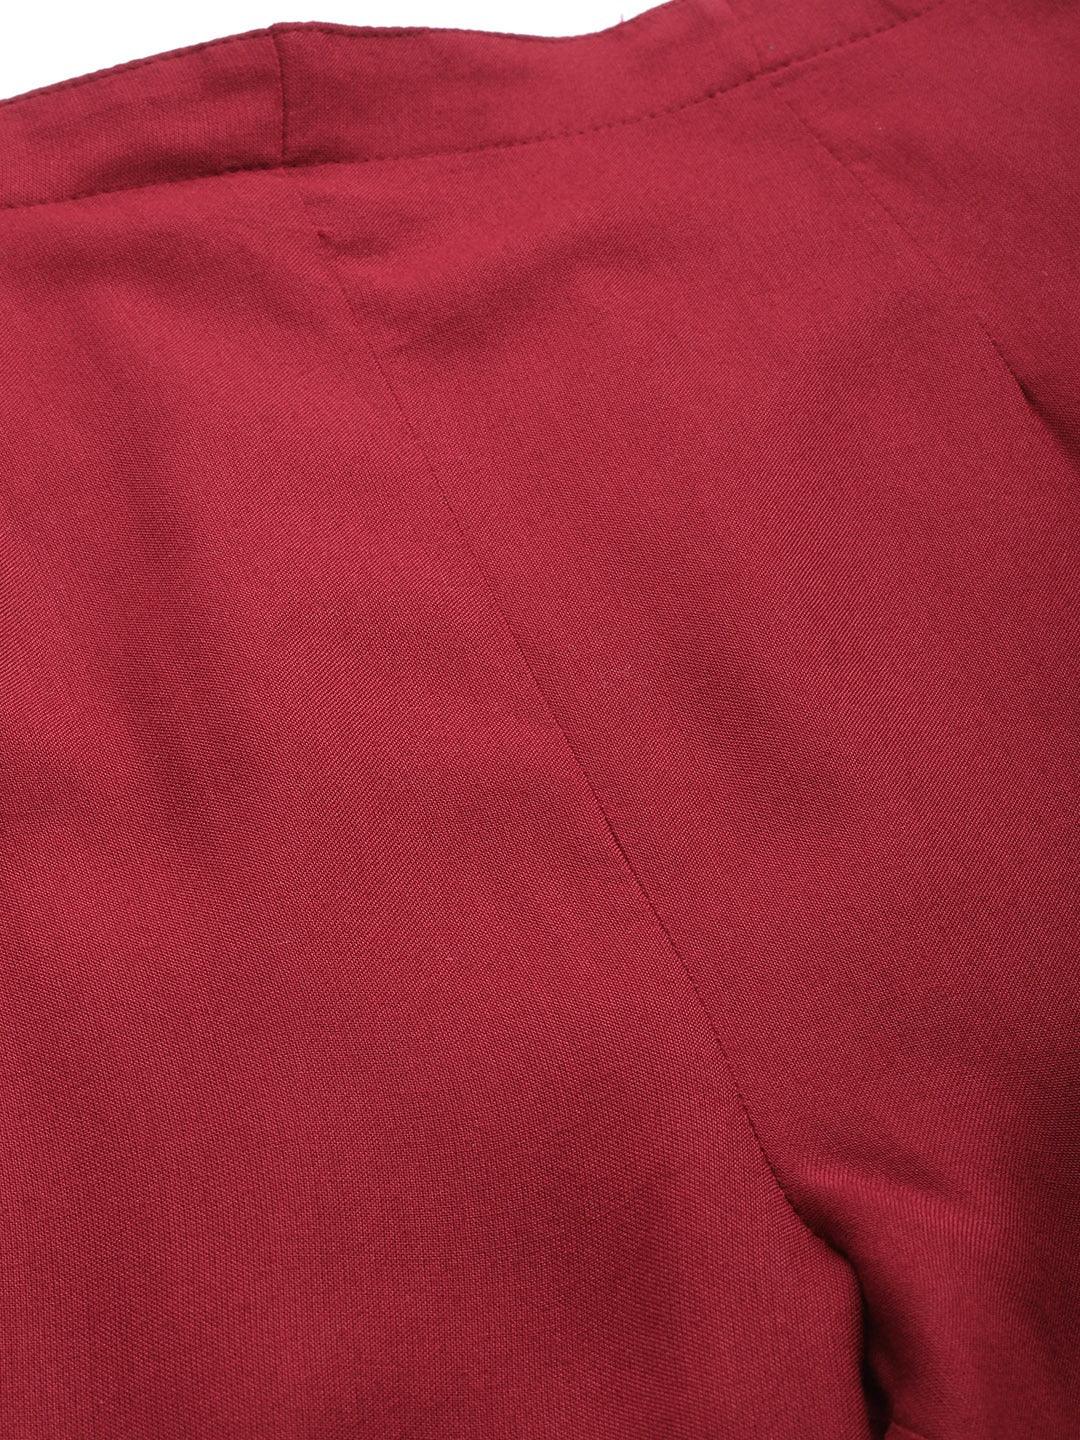 Maroon Solid Rayon Trousers